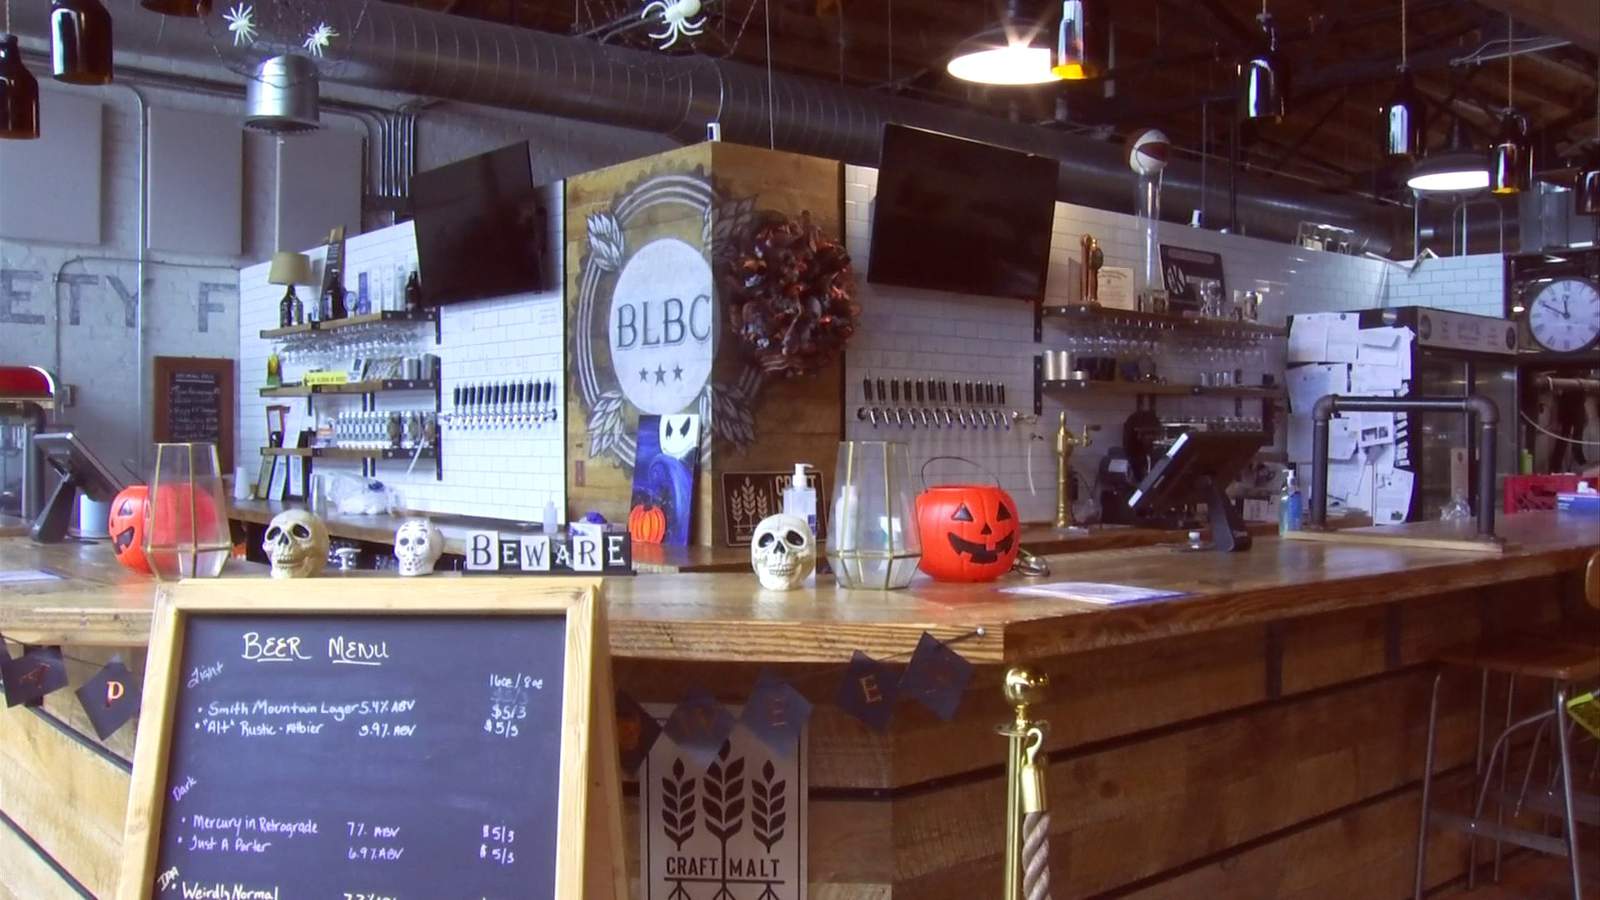 Roanoke businesses face difficult decisions on Halloween parties